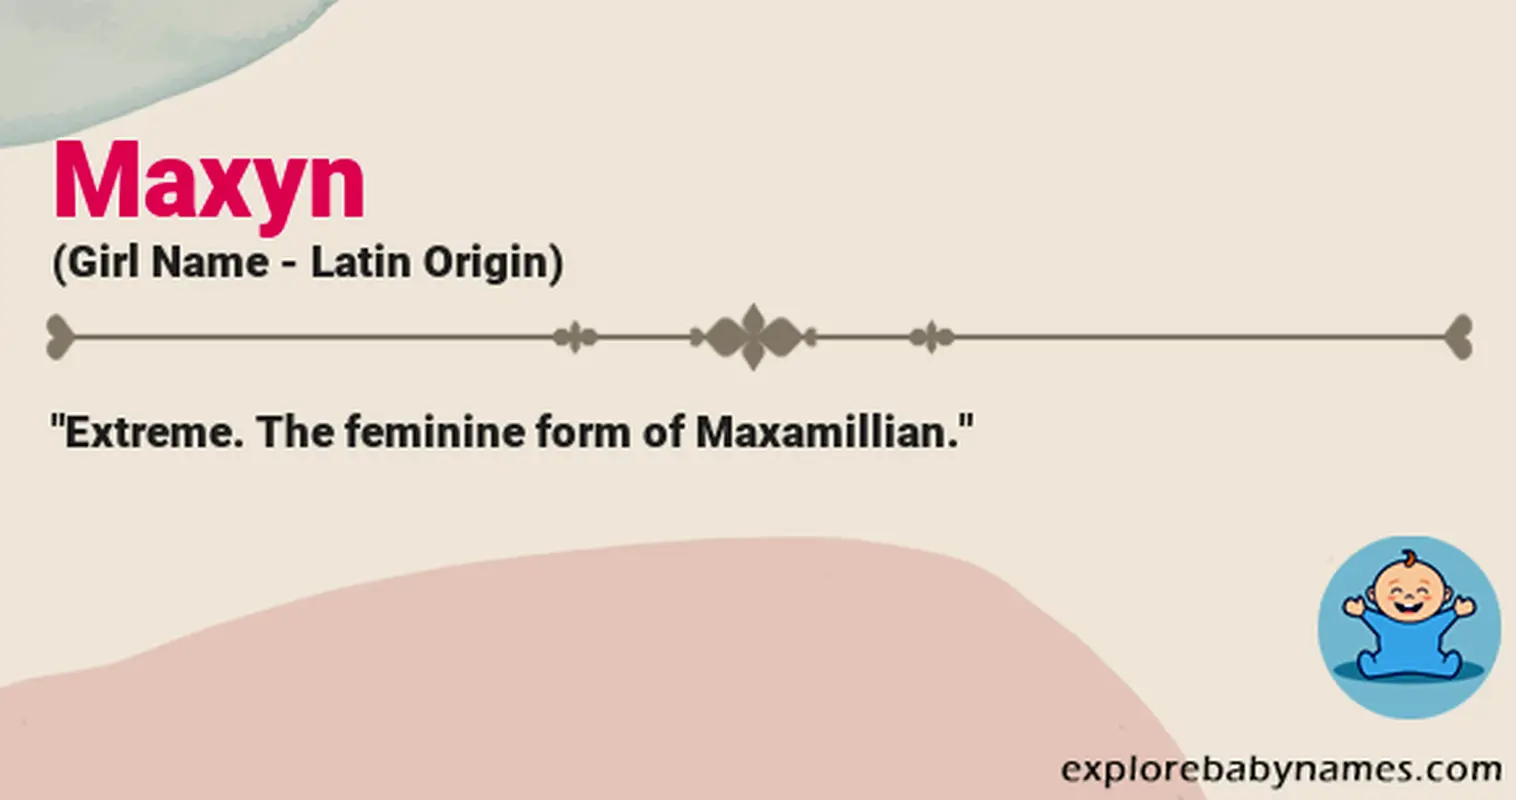 Meaning of Maxyn